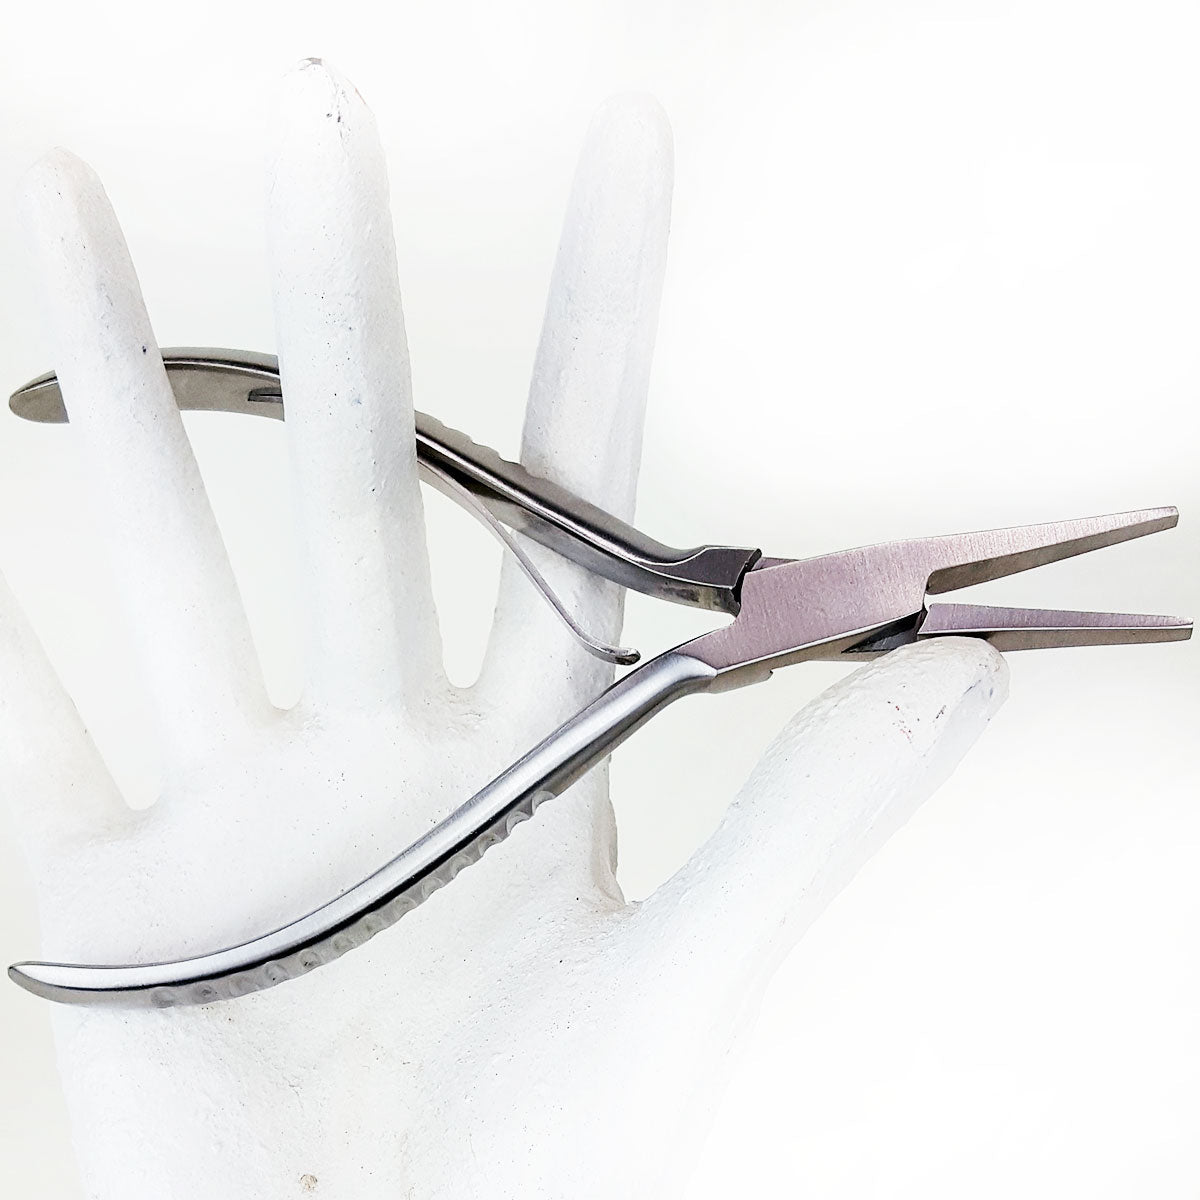 Stainless steel flat glide clamp closer for linkies and microrings in mannequin hand